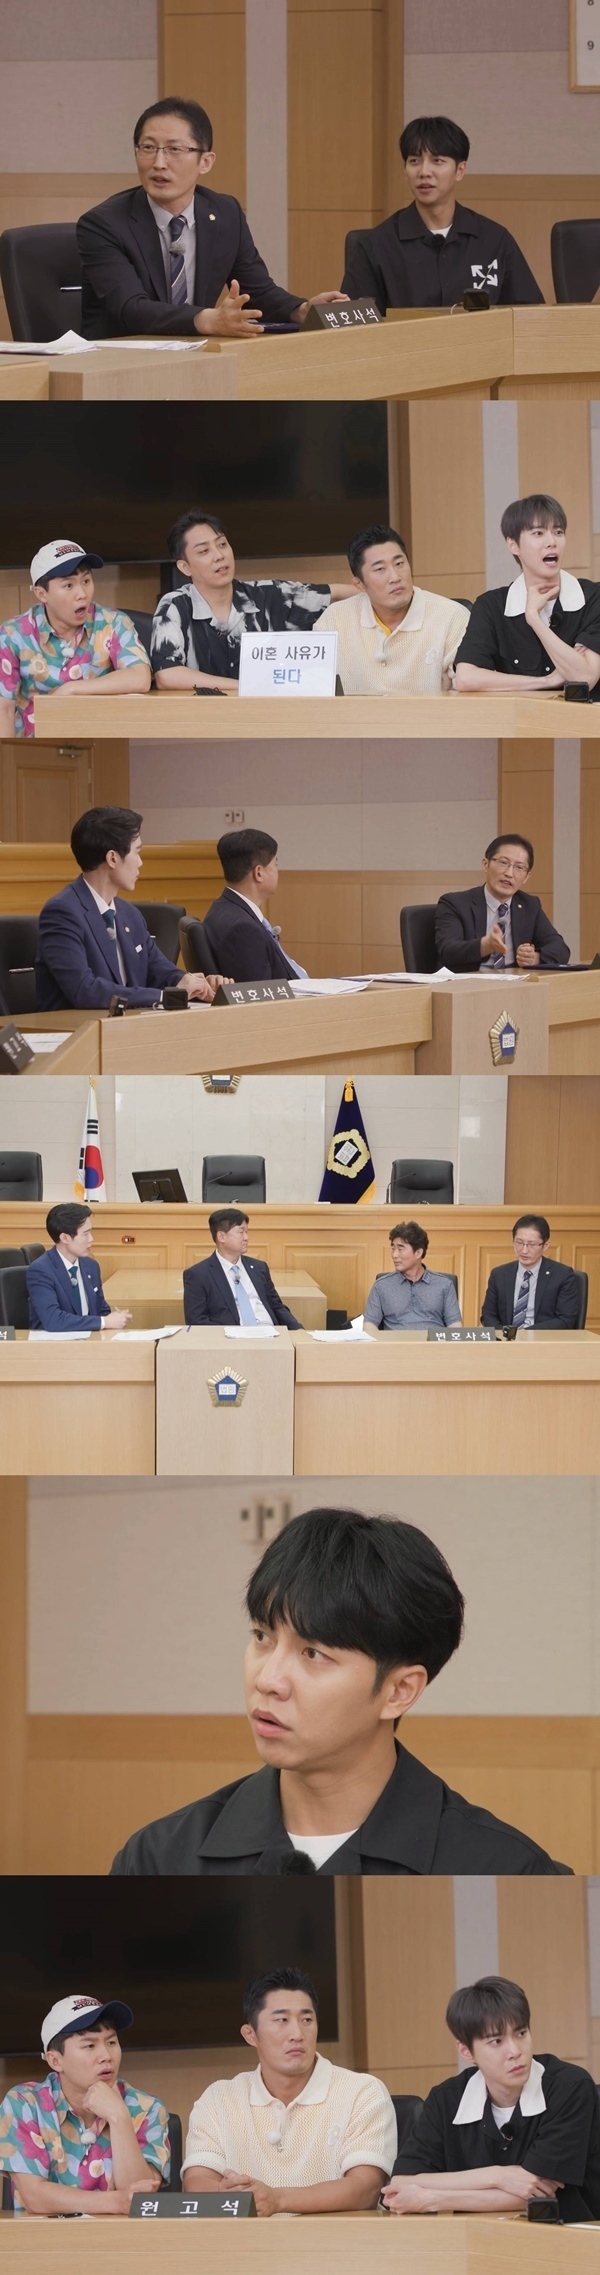 Singer and actor Lee Seung-gi has impressed Lawyers in a mock trial on the subject of divorce.SBS said on July 31, SBS All The Butlers, which will be broadcasted at 6:30 pm on this day, will be featured as a special feature of Justice Department that can easily learn legal knowledge in daily life.From the diverce, the housework law law law law, to the New Trial Lawyer, the specialization of the field Lawyer Corps appears as a master and tells various legal stories. The show will feature South Koreas first New Trial Lawyer Park Joon-yung.He is a New Trial Lawyer with a 100% winning rate that led to the acquittal of New Trial, including the Murder 8th incident of Mars and the Nakdong River Murder case.Park Joon-yung Lawyer reveals all the stories of the New Trial incidents he has been in charge of All The Butlers.Jang Dong-ik, who had been in prison for 21 years as a criminal in the actual Nakdong River Murder case, is expected to appear in surprise.Master Lee In-cheol, who appeared as a specialist in the Divorce and Household Lawyer, solves about 10,000 cases of divorce counseling that have been undertaken so far and proceeds with mock trial with members.A couples divorce lawsuit will be held in a heated battle over whether or not it will be a cause of divorce over a messenger capture of a man who became one.The criminal law specialist Yun Jung-seop and the New Trial specialist Park Joon-yung were joined by the tension and fierceness as much as the actual trial.Lee Seung-gi is said to have gained the admiration of Lawyers by unfolding Last-change, which has a decisive impact on the mock ruling.